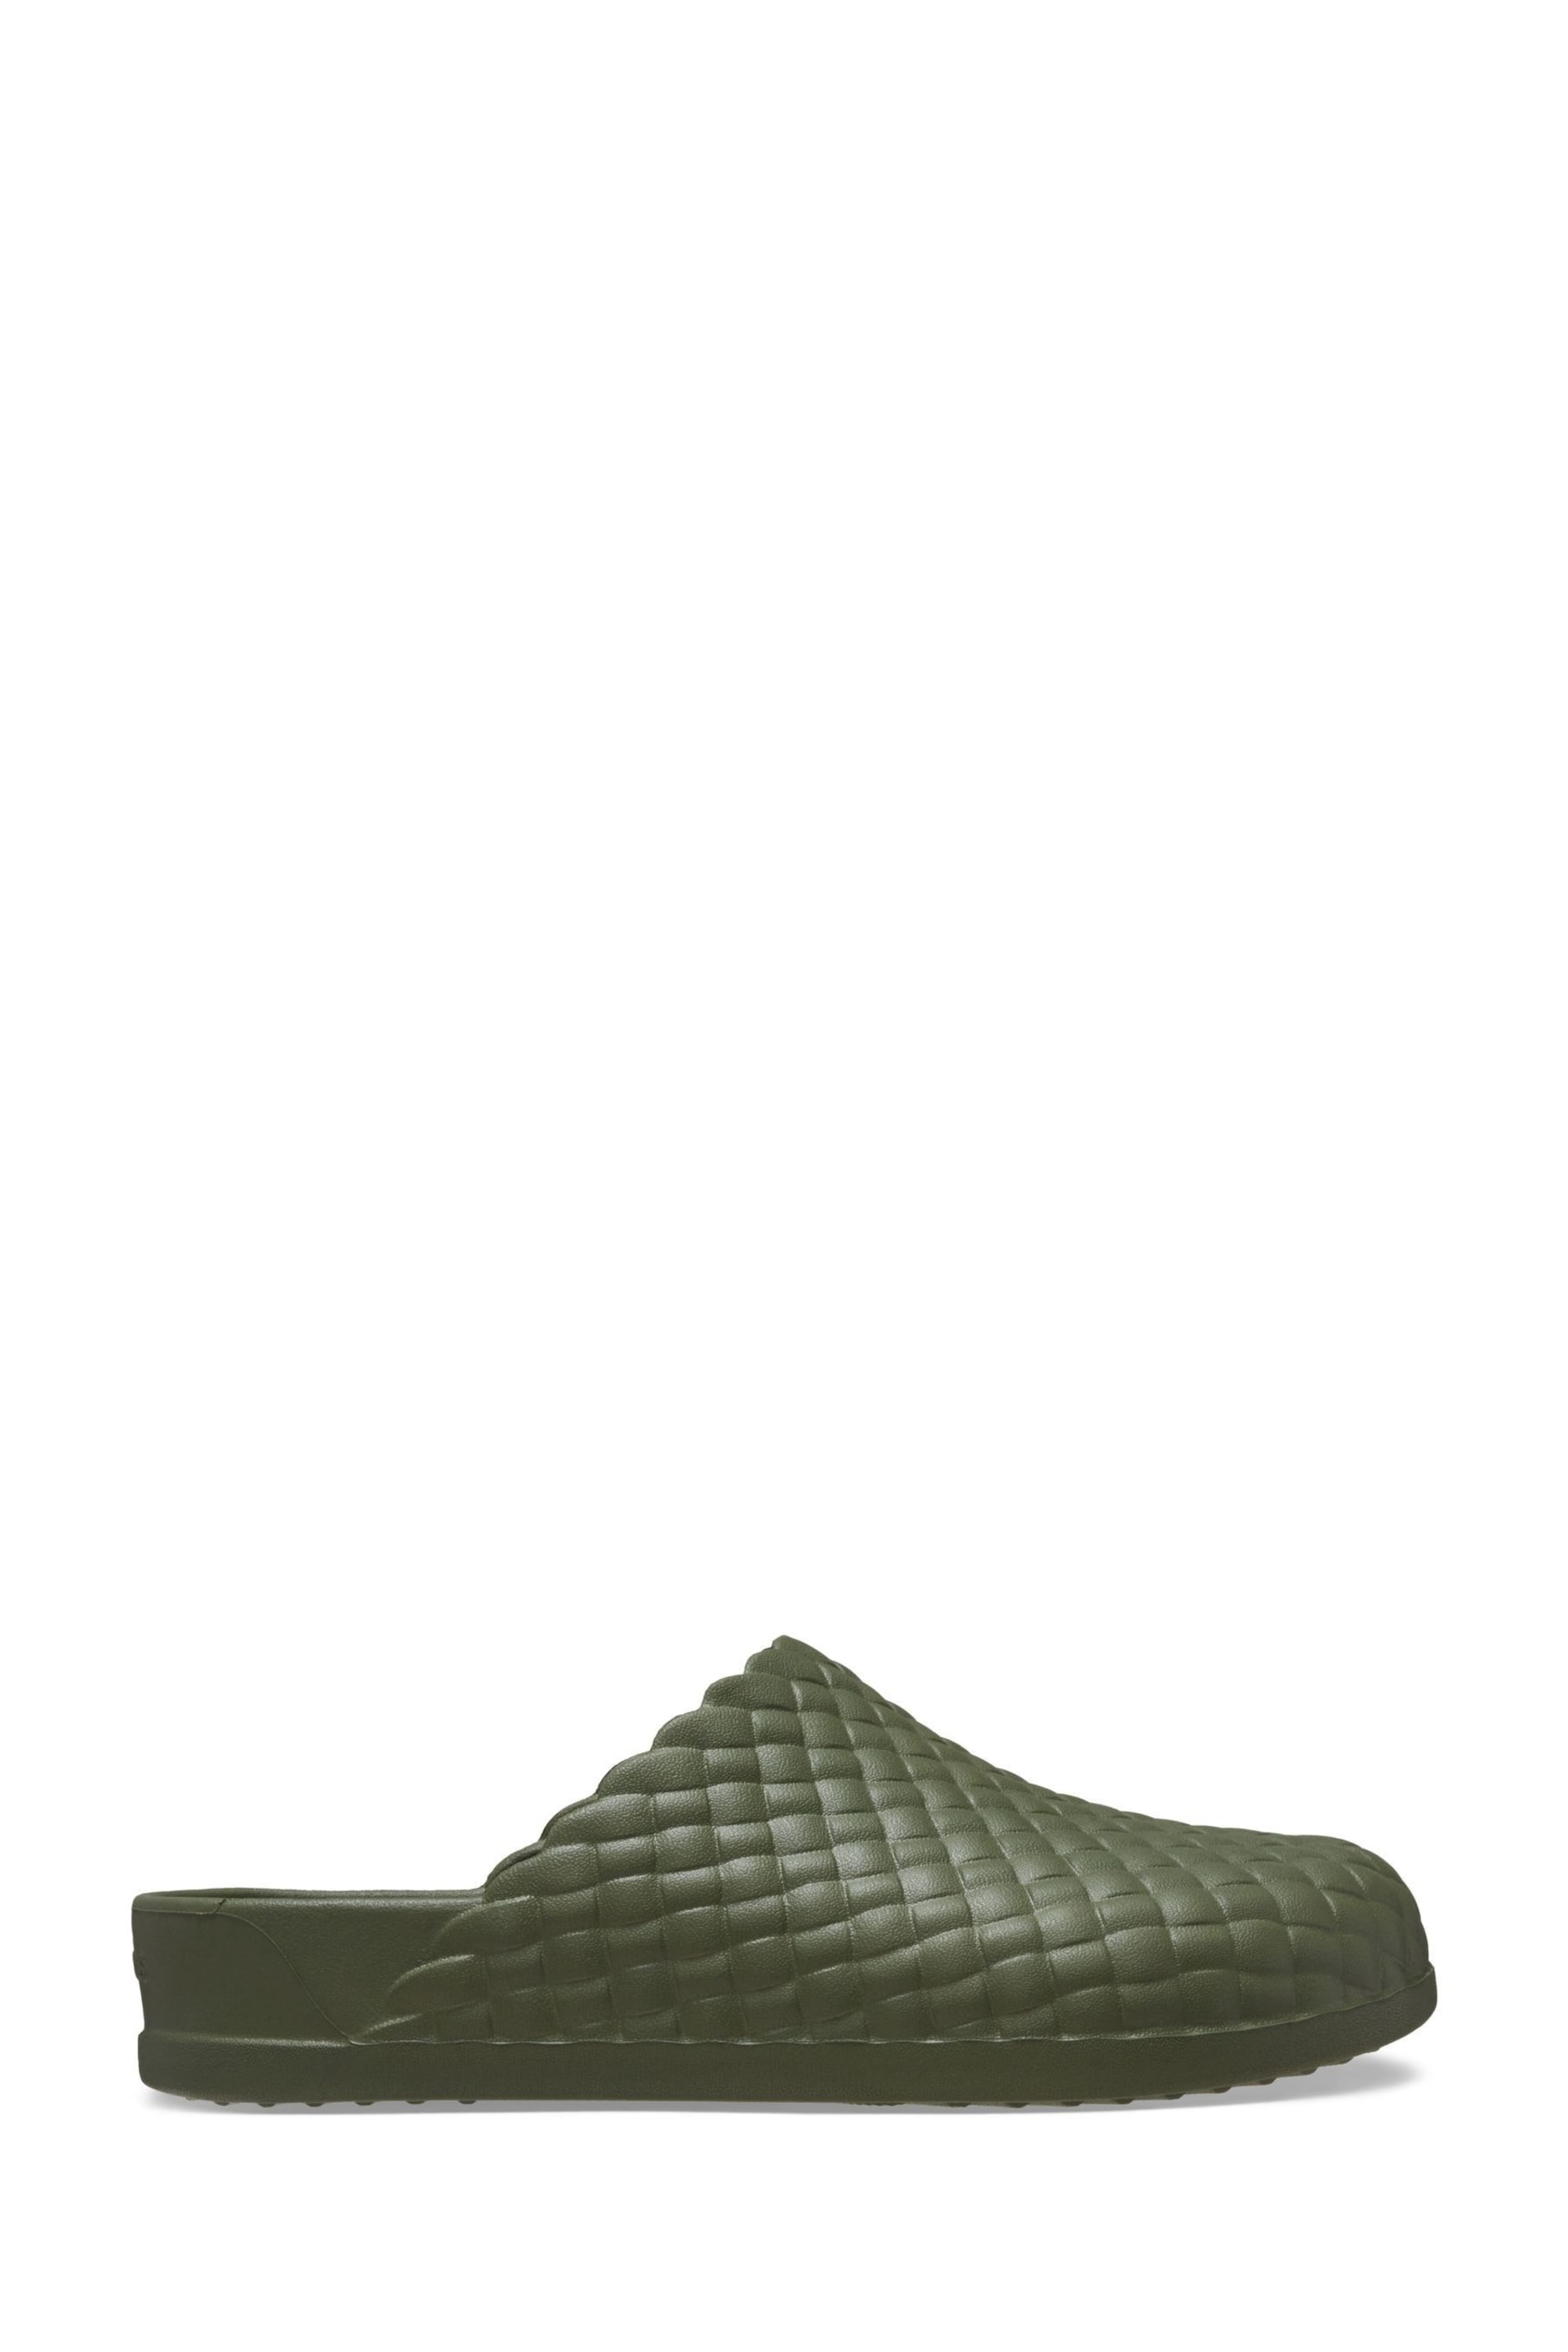 Crocs Dylan Woven Texture Clogs - Image 1 of 6